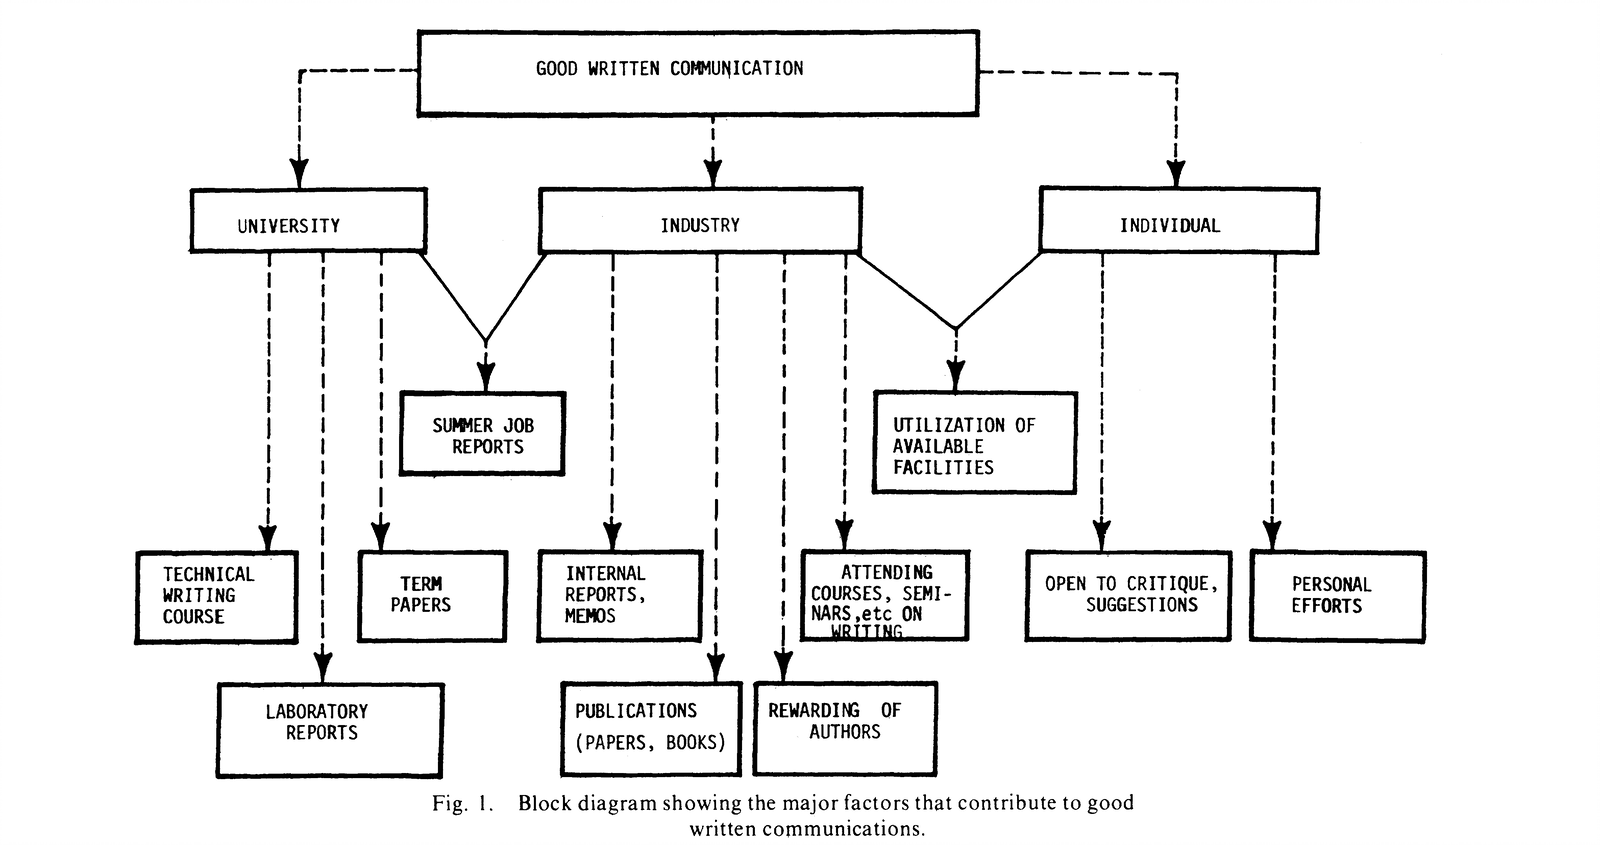 Model of industry-relevant communication types